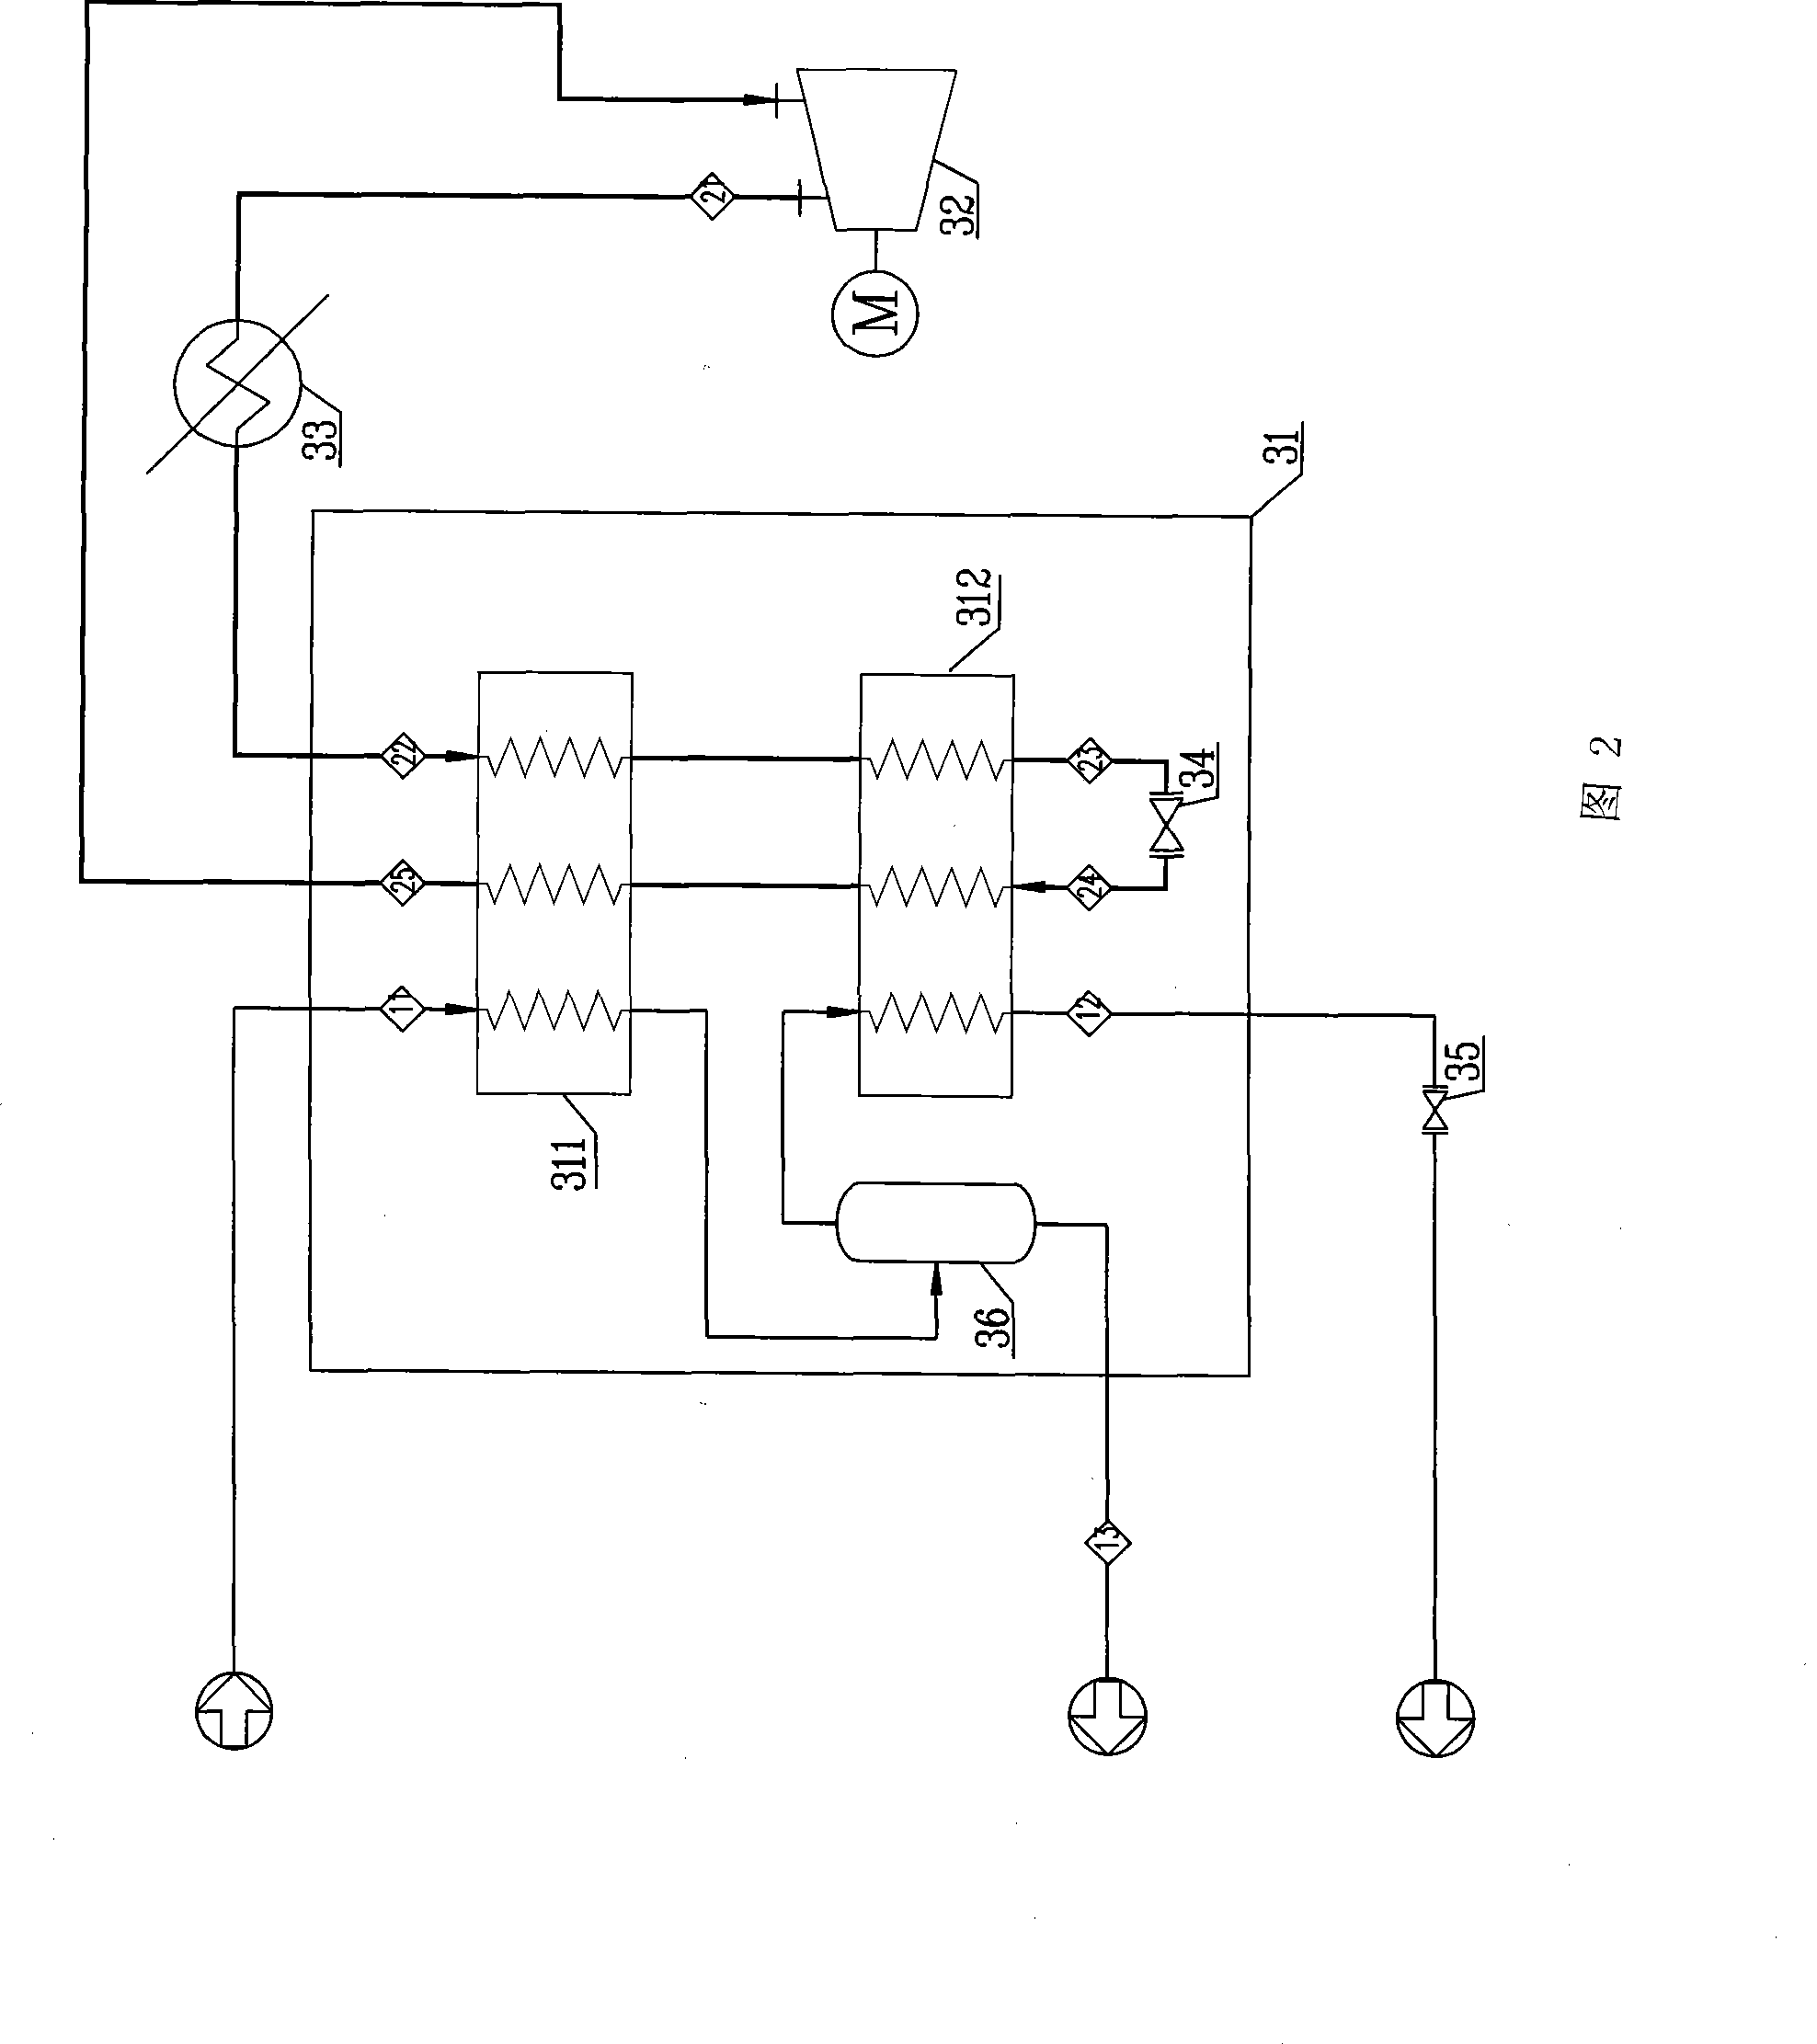 Method and apparatus for single-stage mixing cryogen refrigerating cycle liquefied natural gas